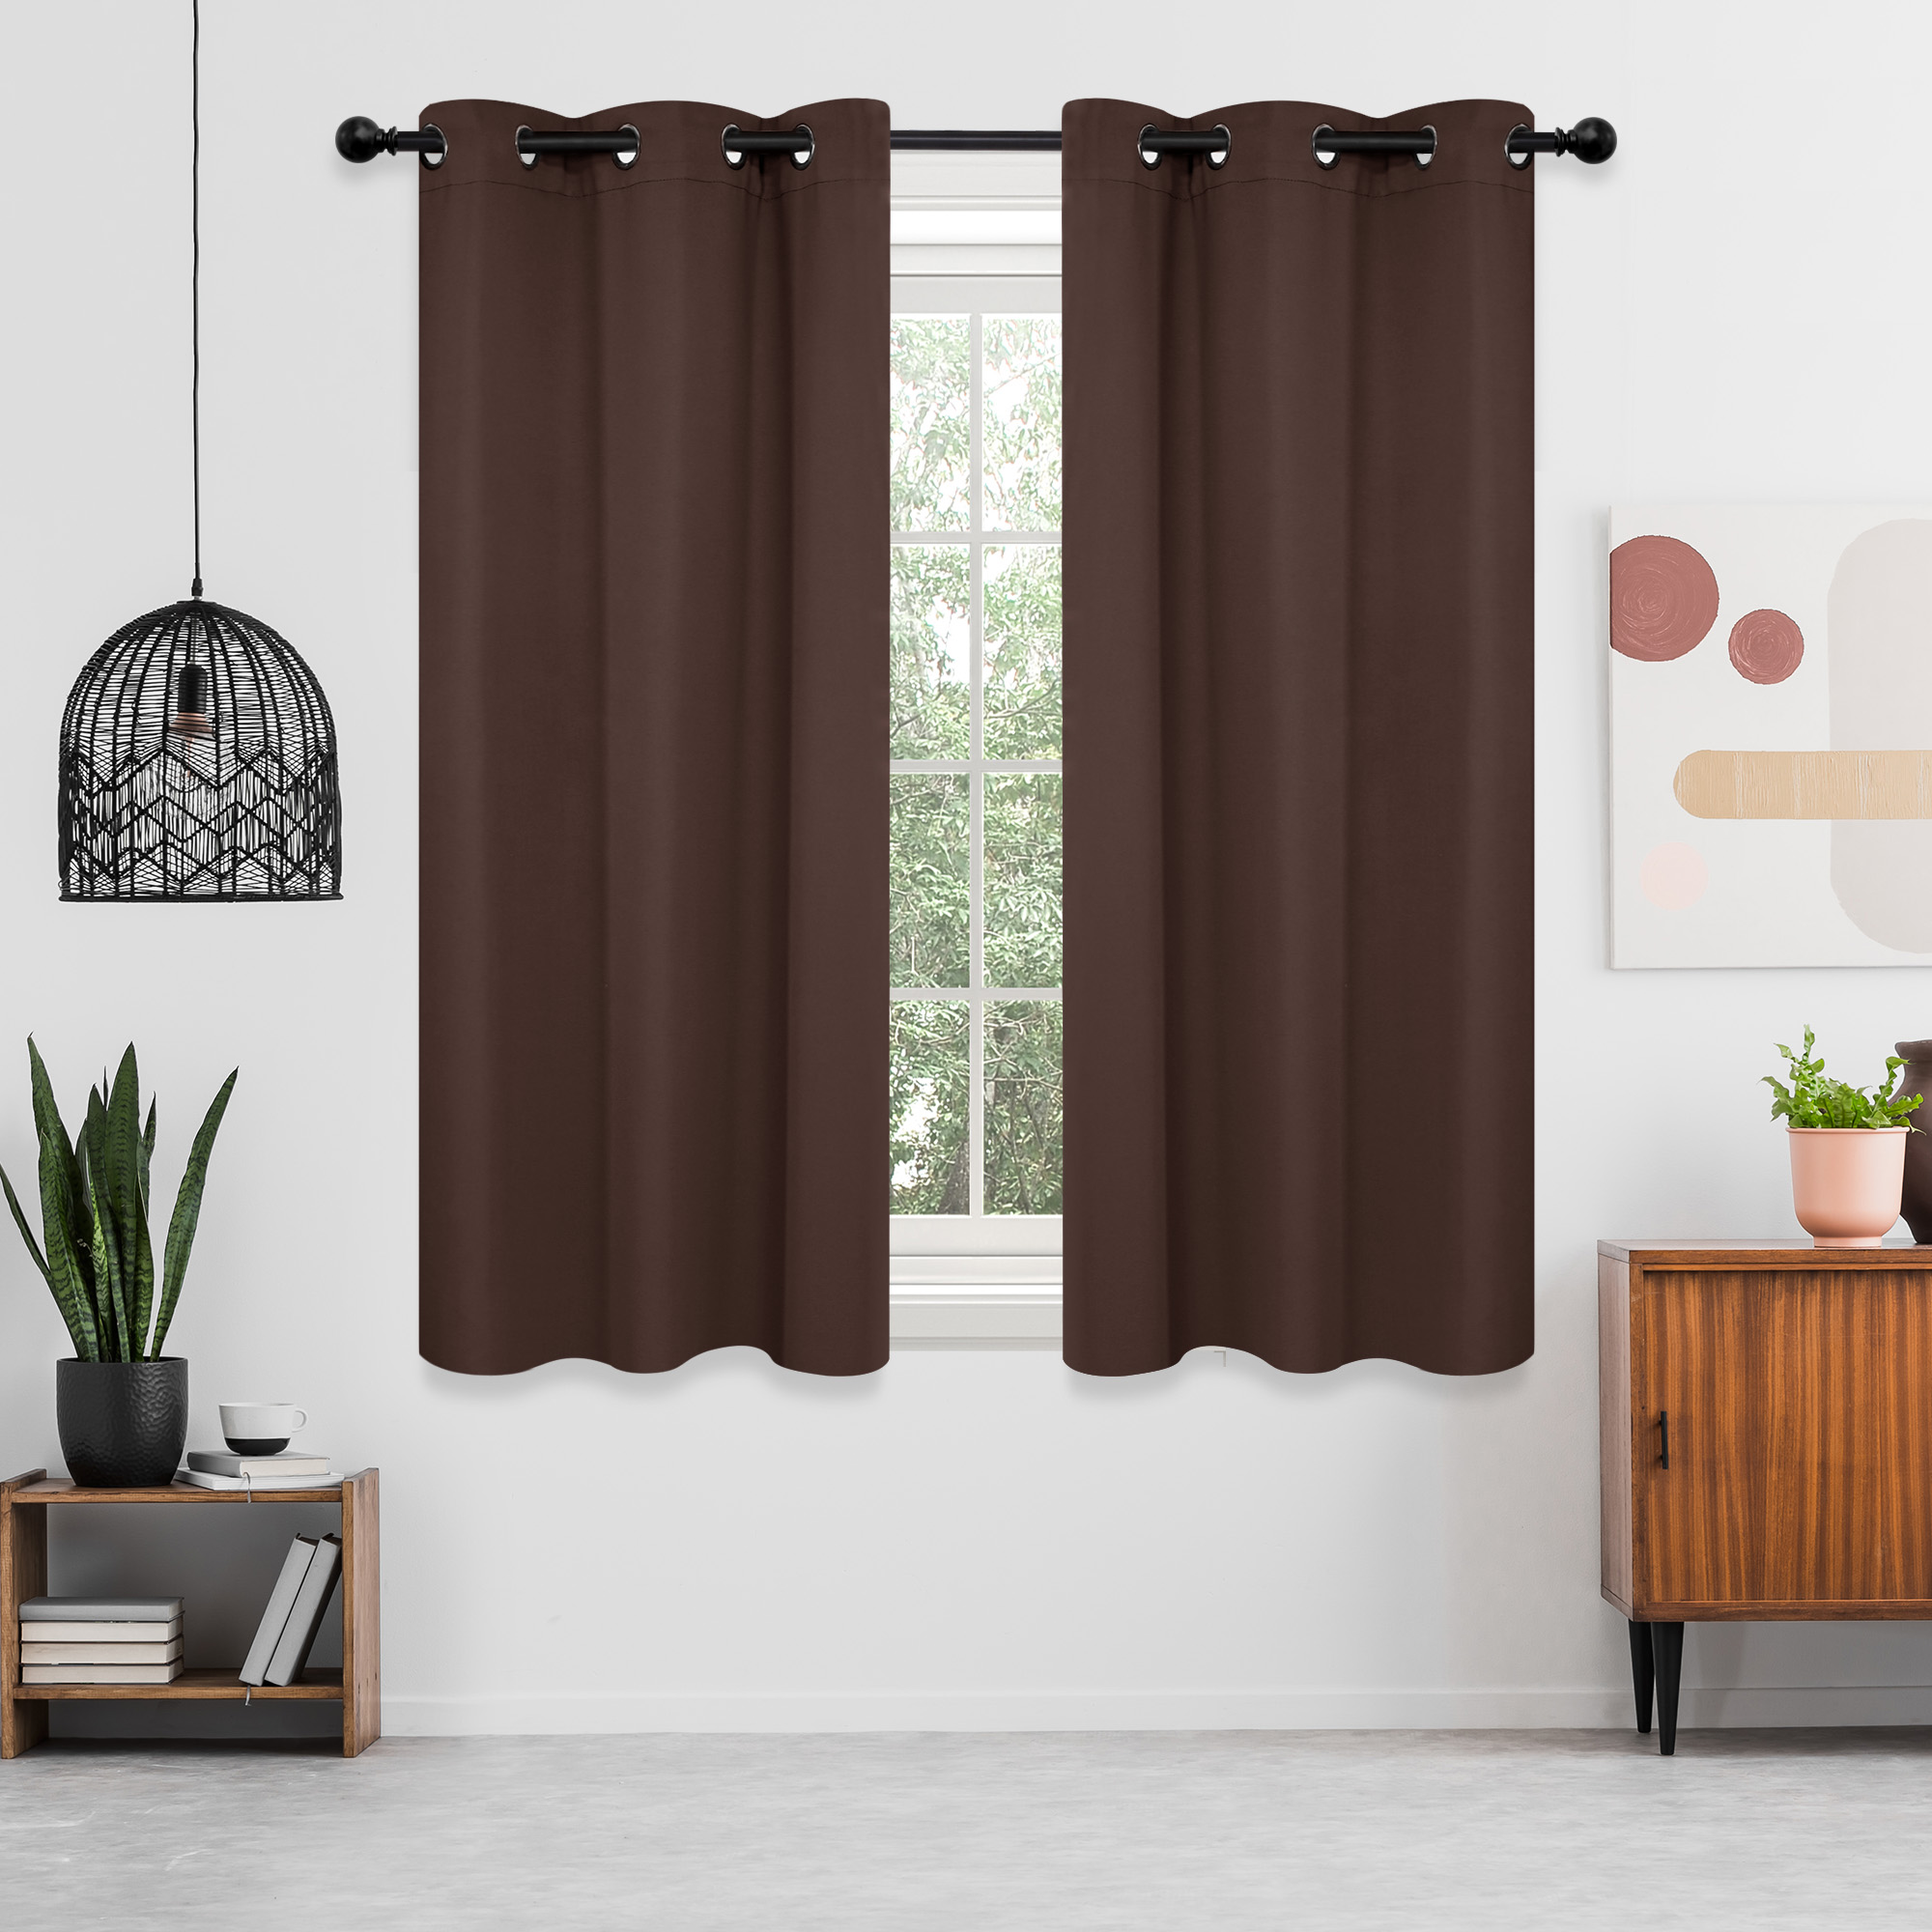 RYB HOME Short Blackout Curtains Thermal Insulated Noise Reducing 